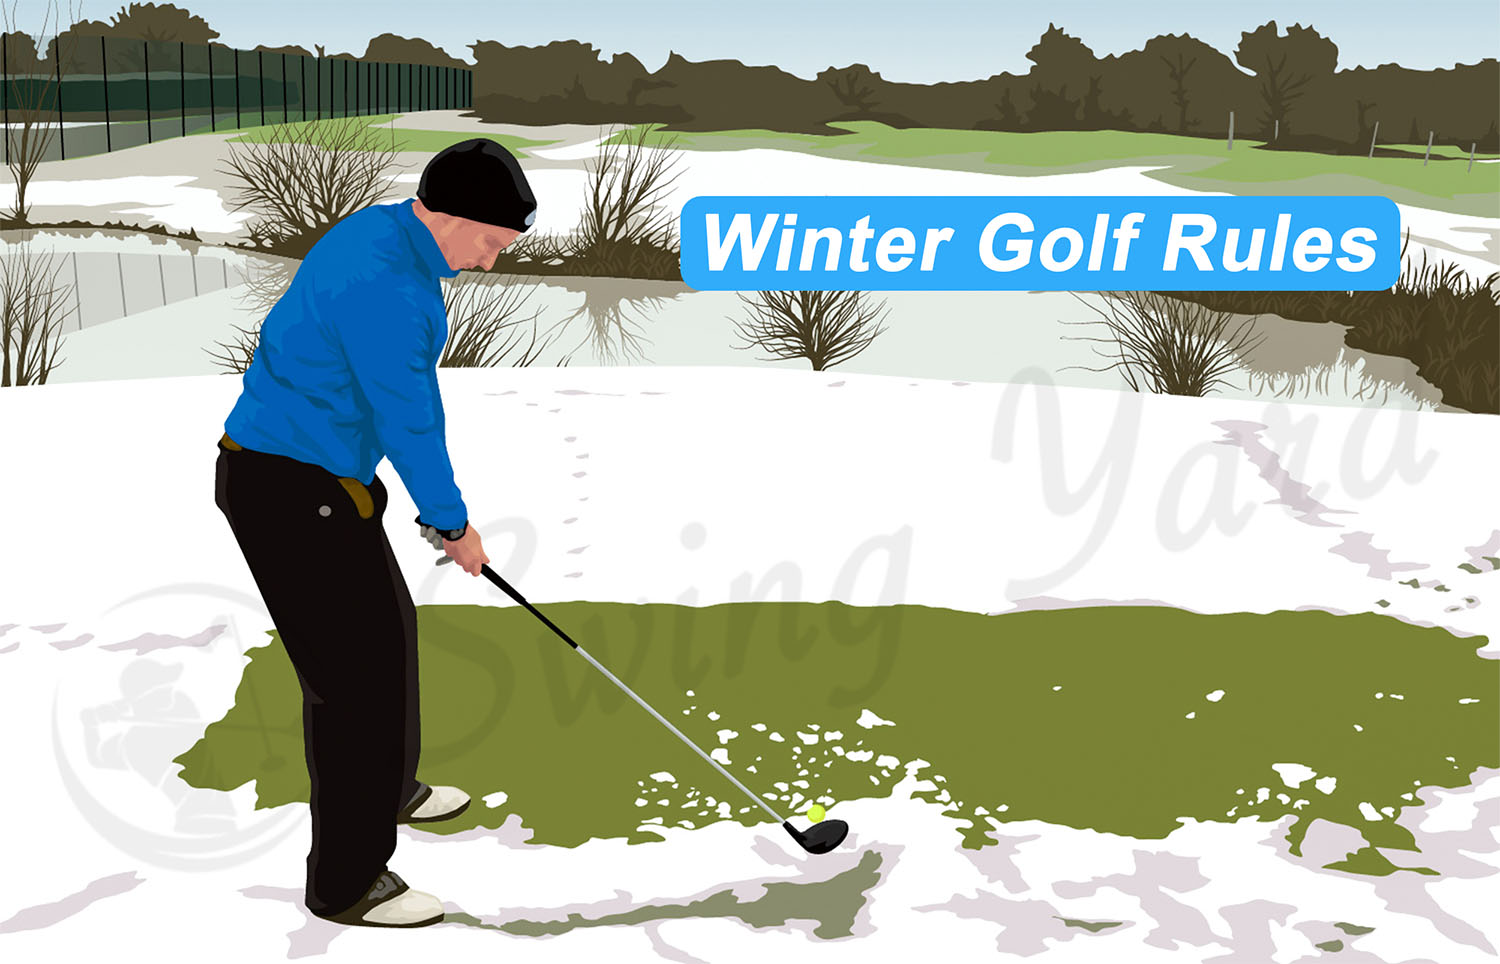 A guy hitting a golf ball in the winter